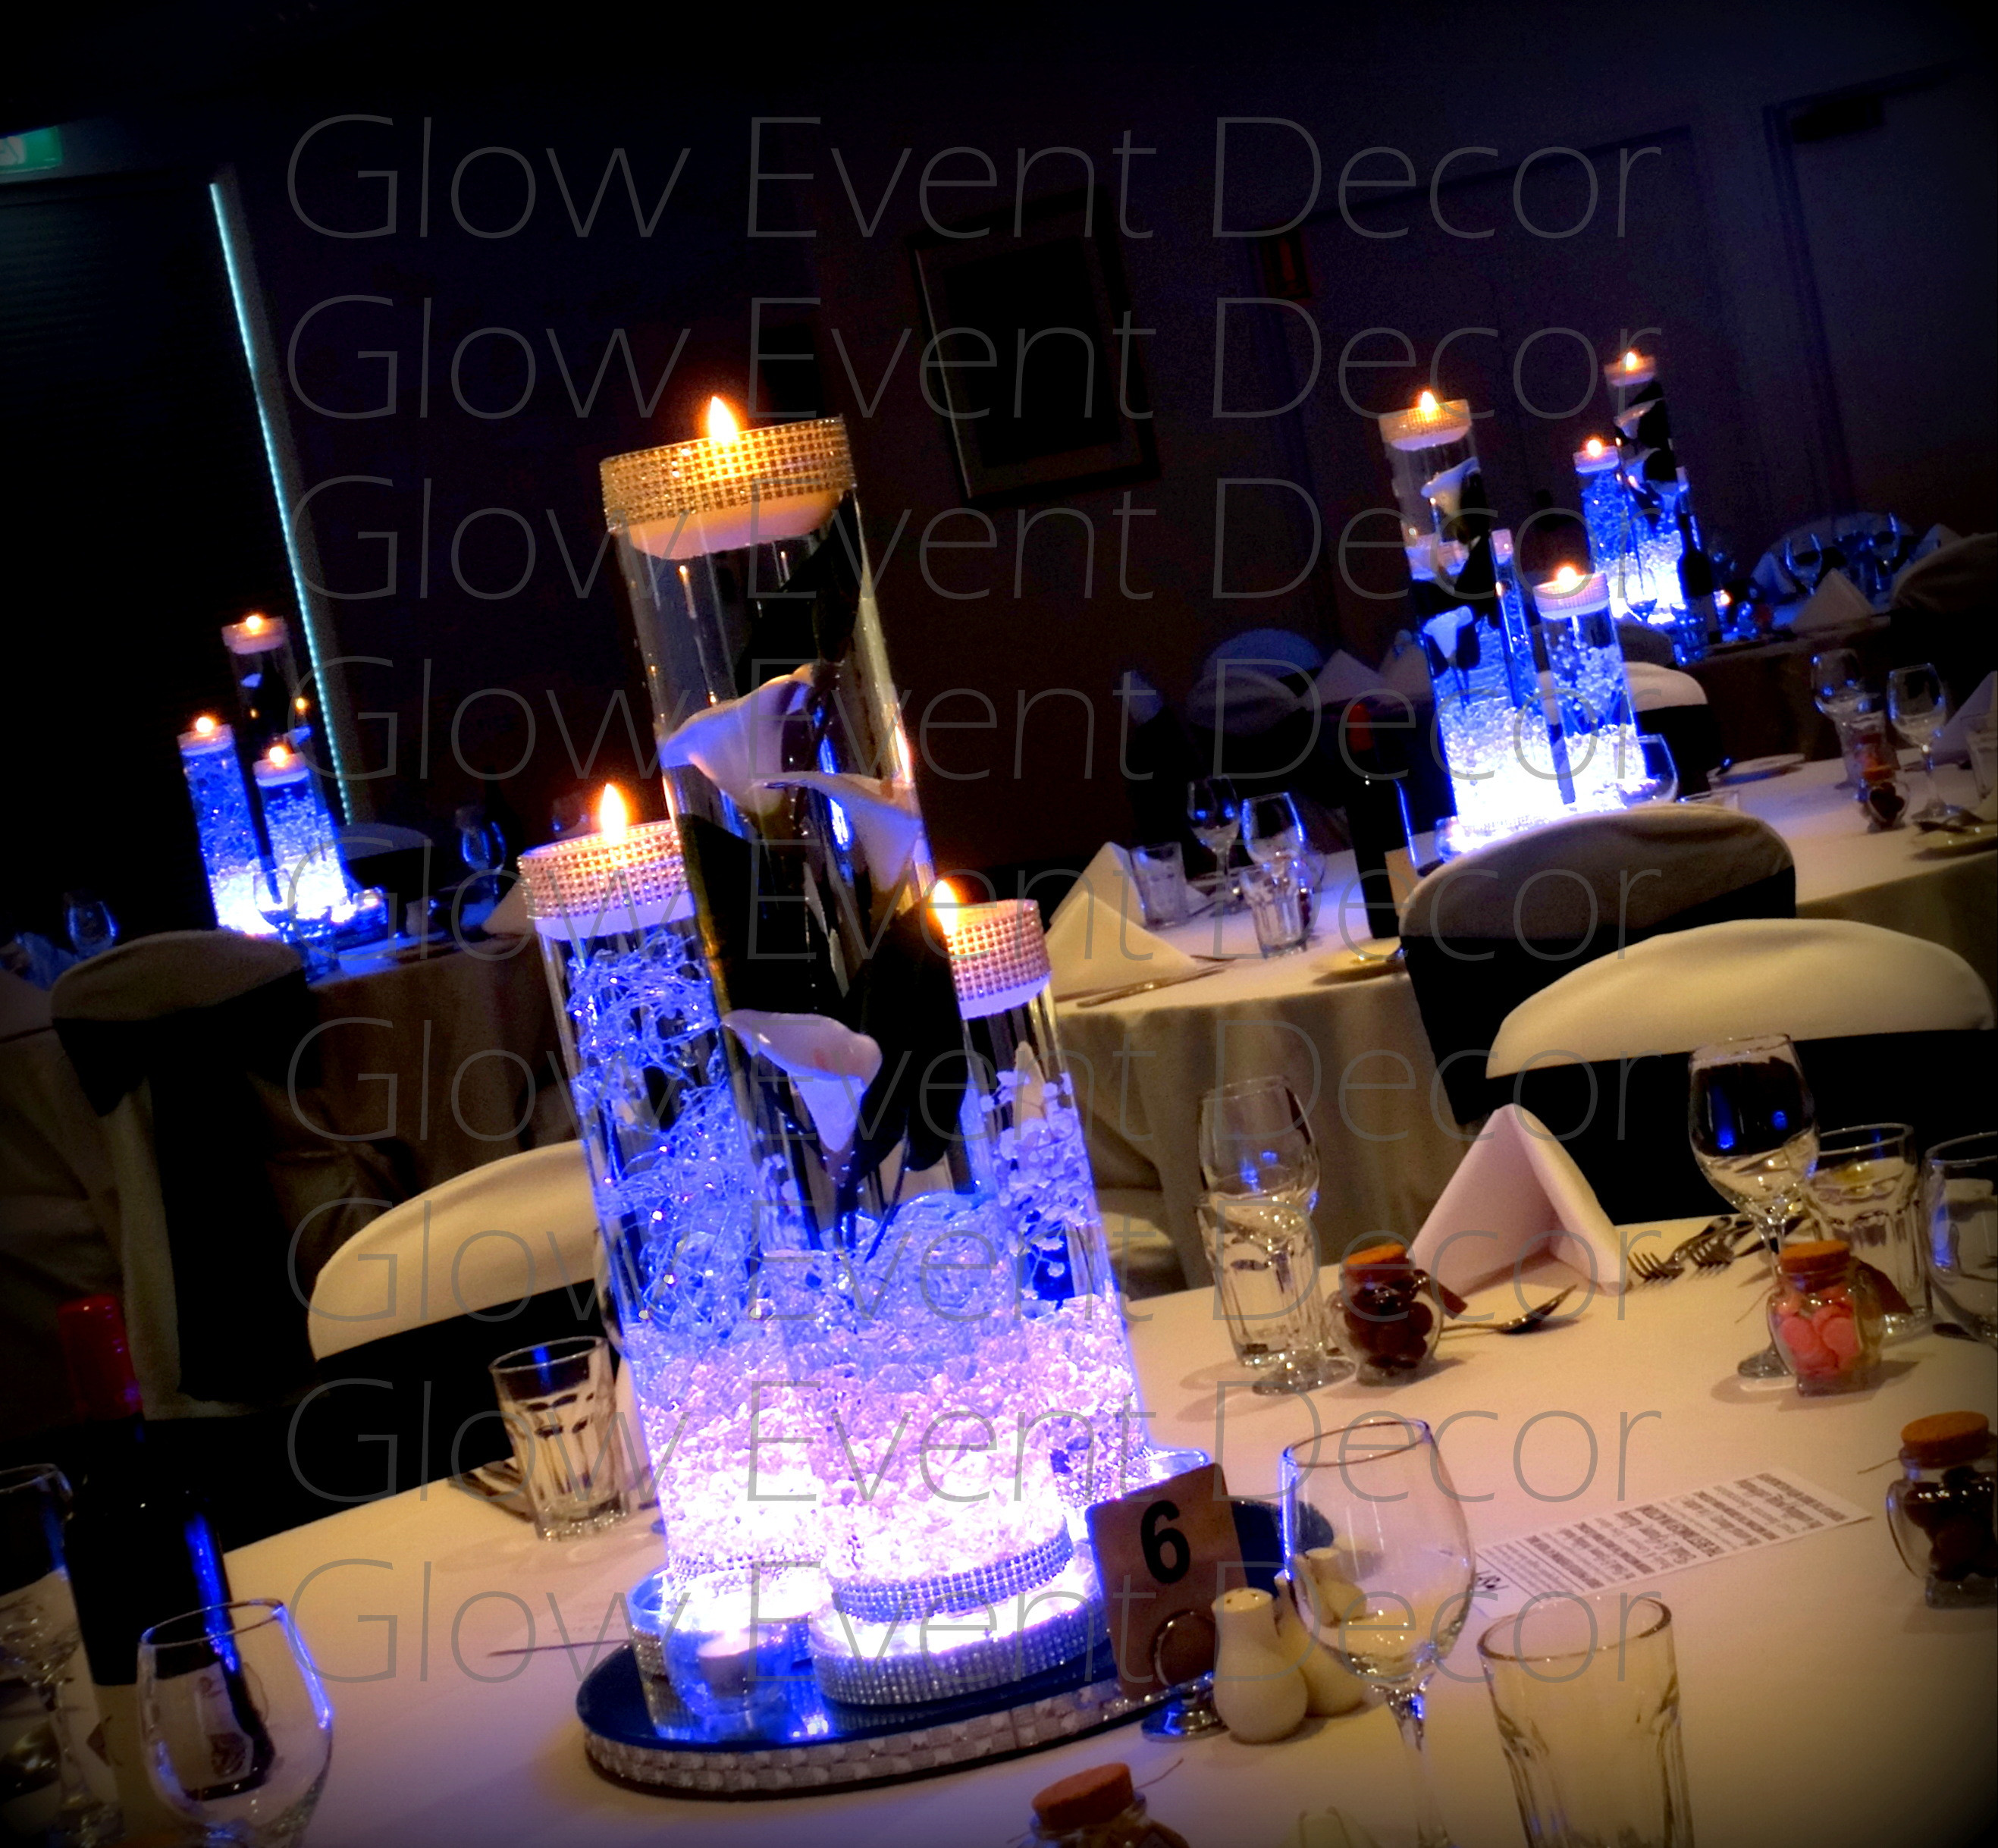 23 Cute Glass Vases for Floating Candles 2024 free download glass vases for floating candles of led orchid cylinder vase glow event decor in cylinder vase trio with led light bases and floating candles for hire glow event decor adelaide